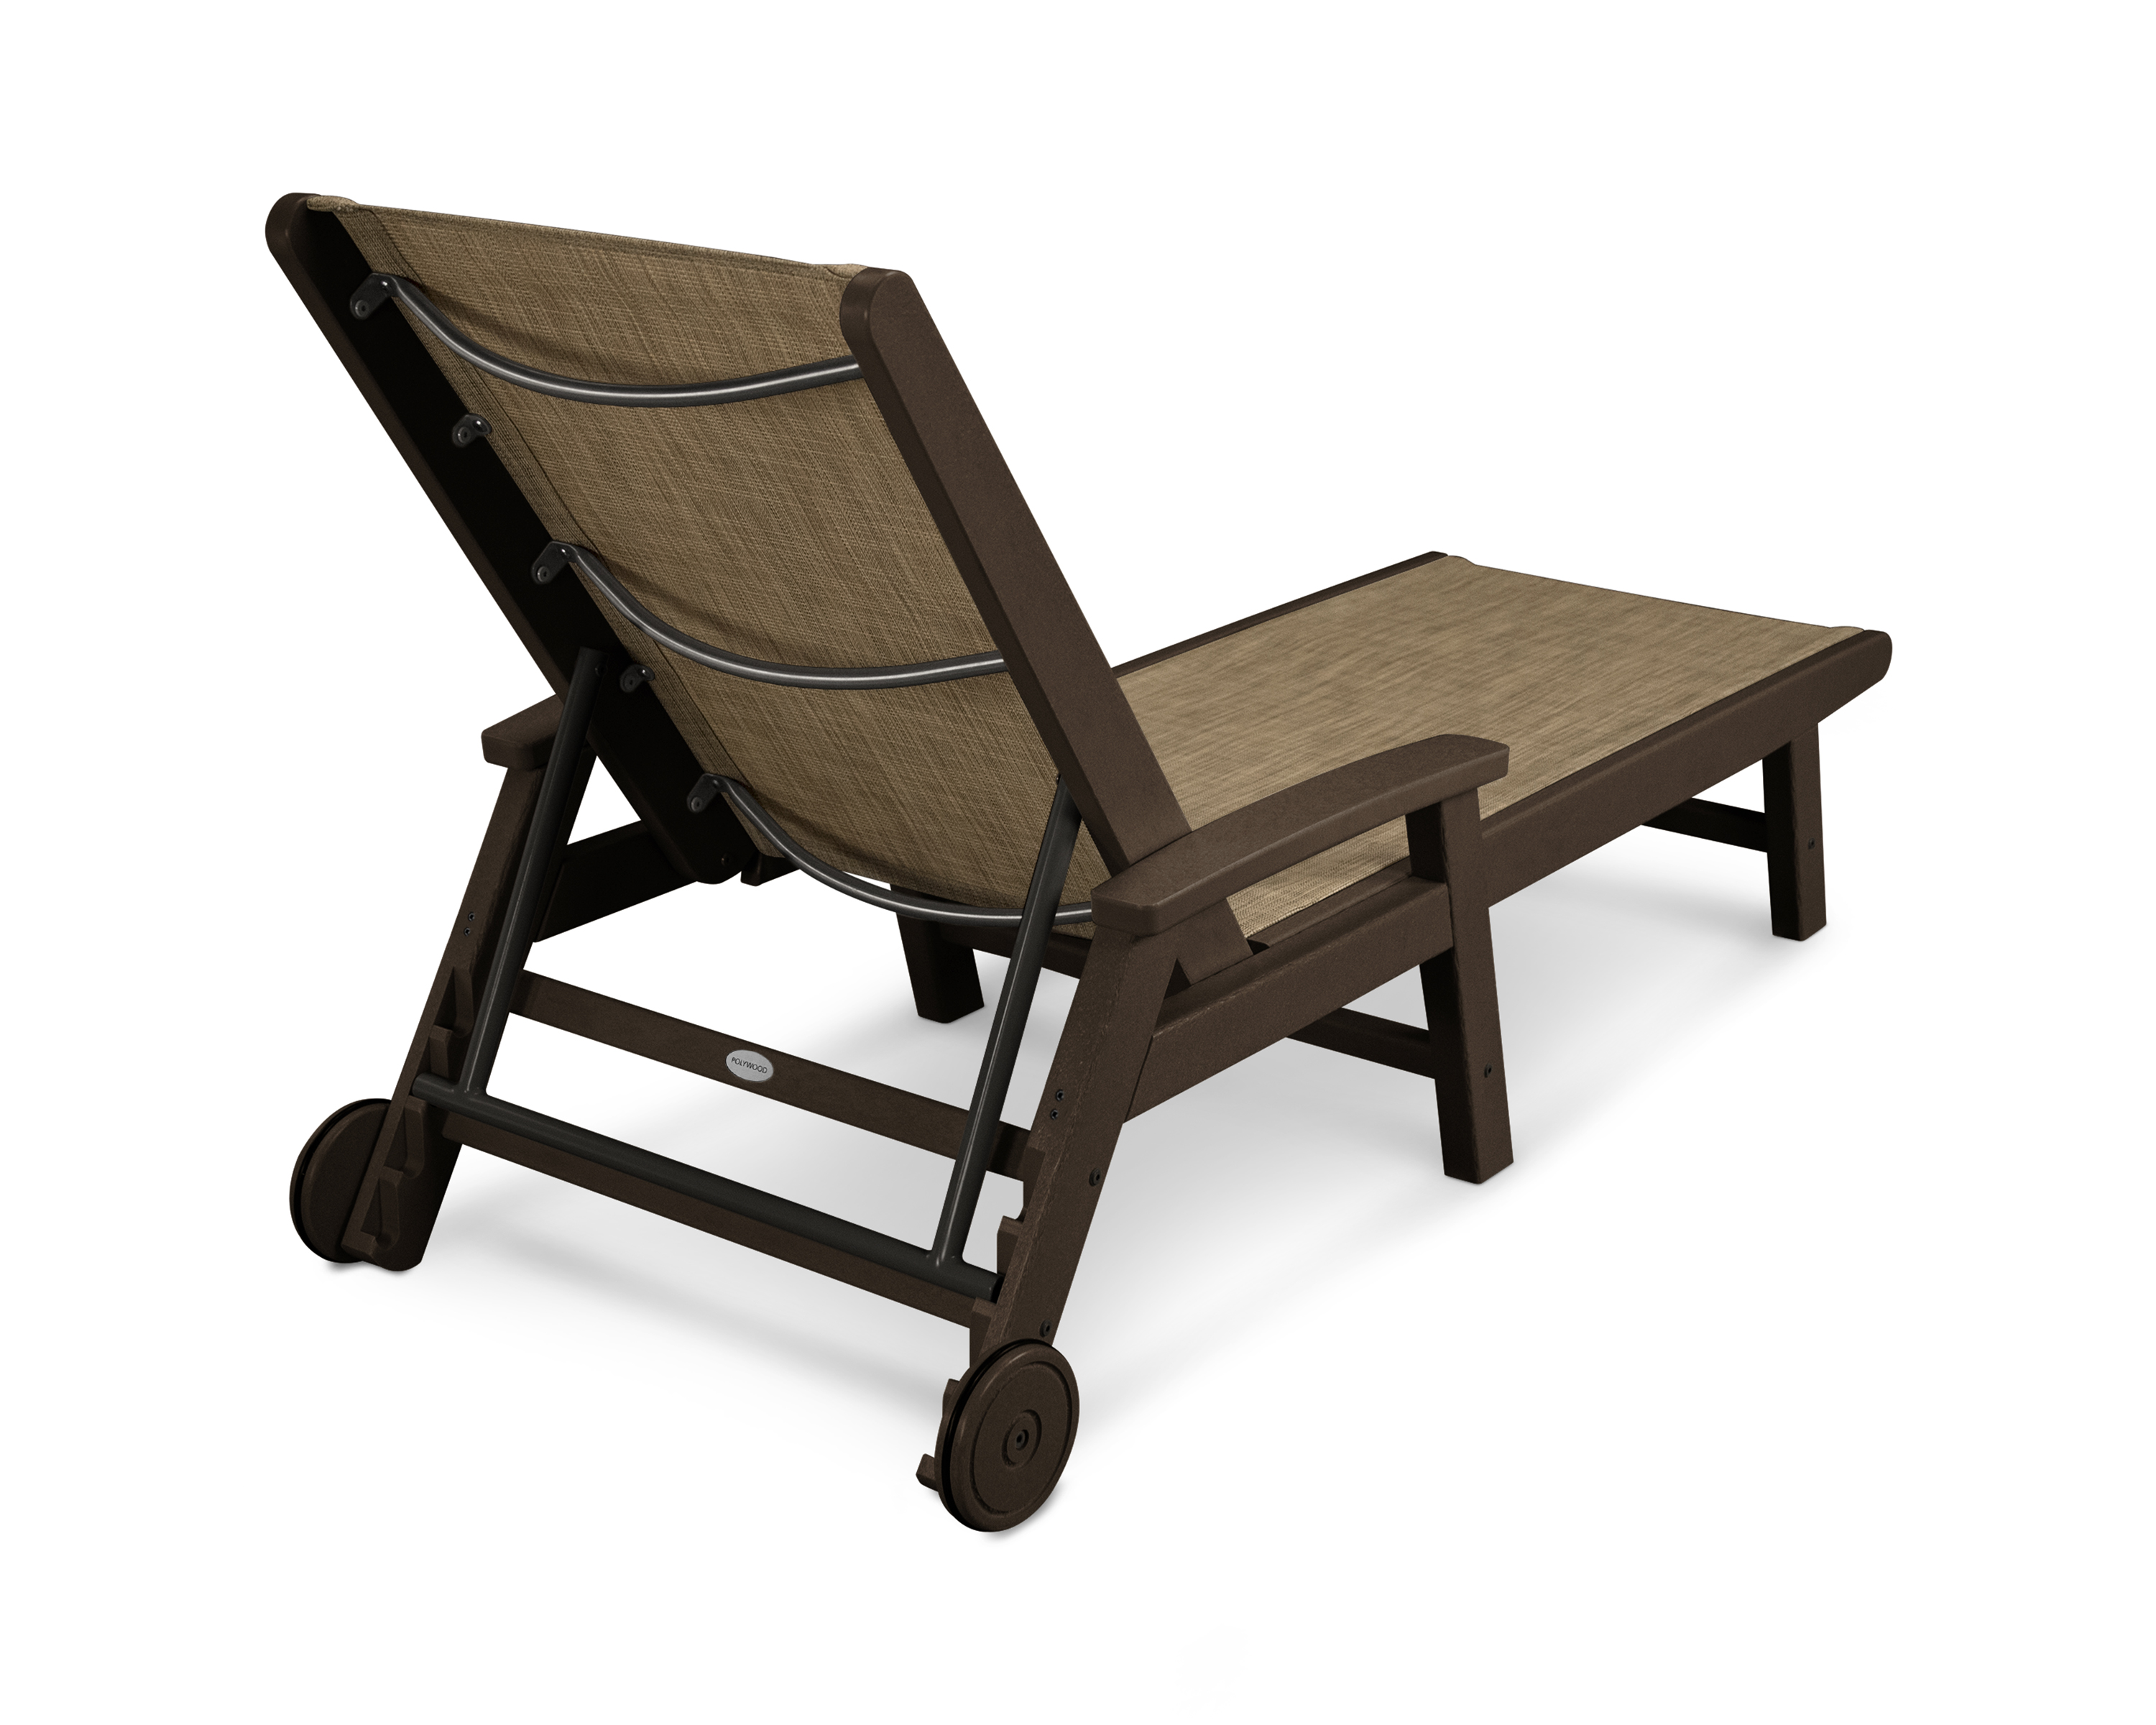 coastal chaise with wheels in mahogany / burlap sling product image